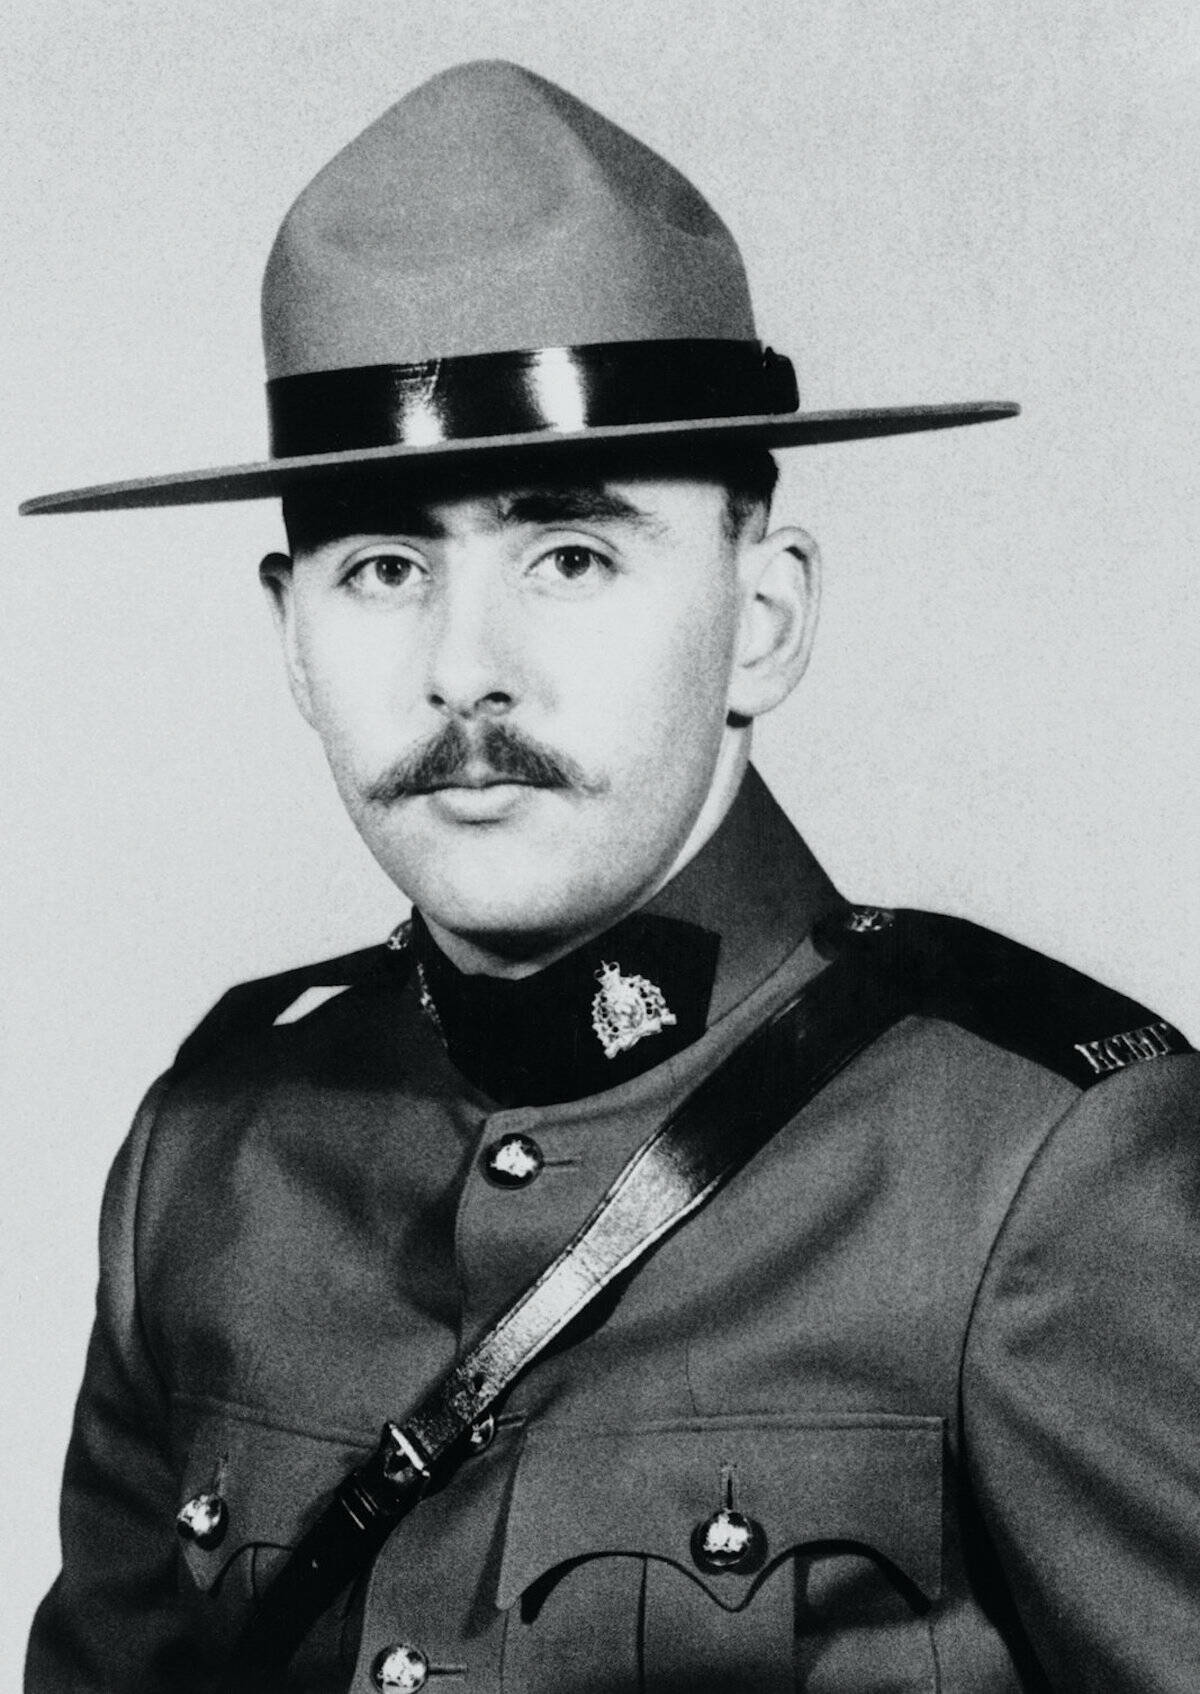 Surrey RCMP Constable Roger Pierlet, 23, was killed on duty in Cloverdale in 1974. (RCMP photo)